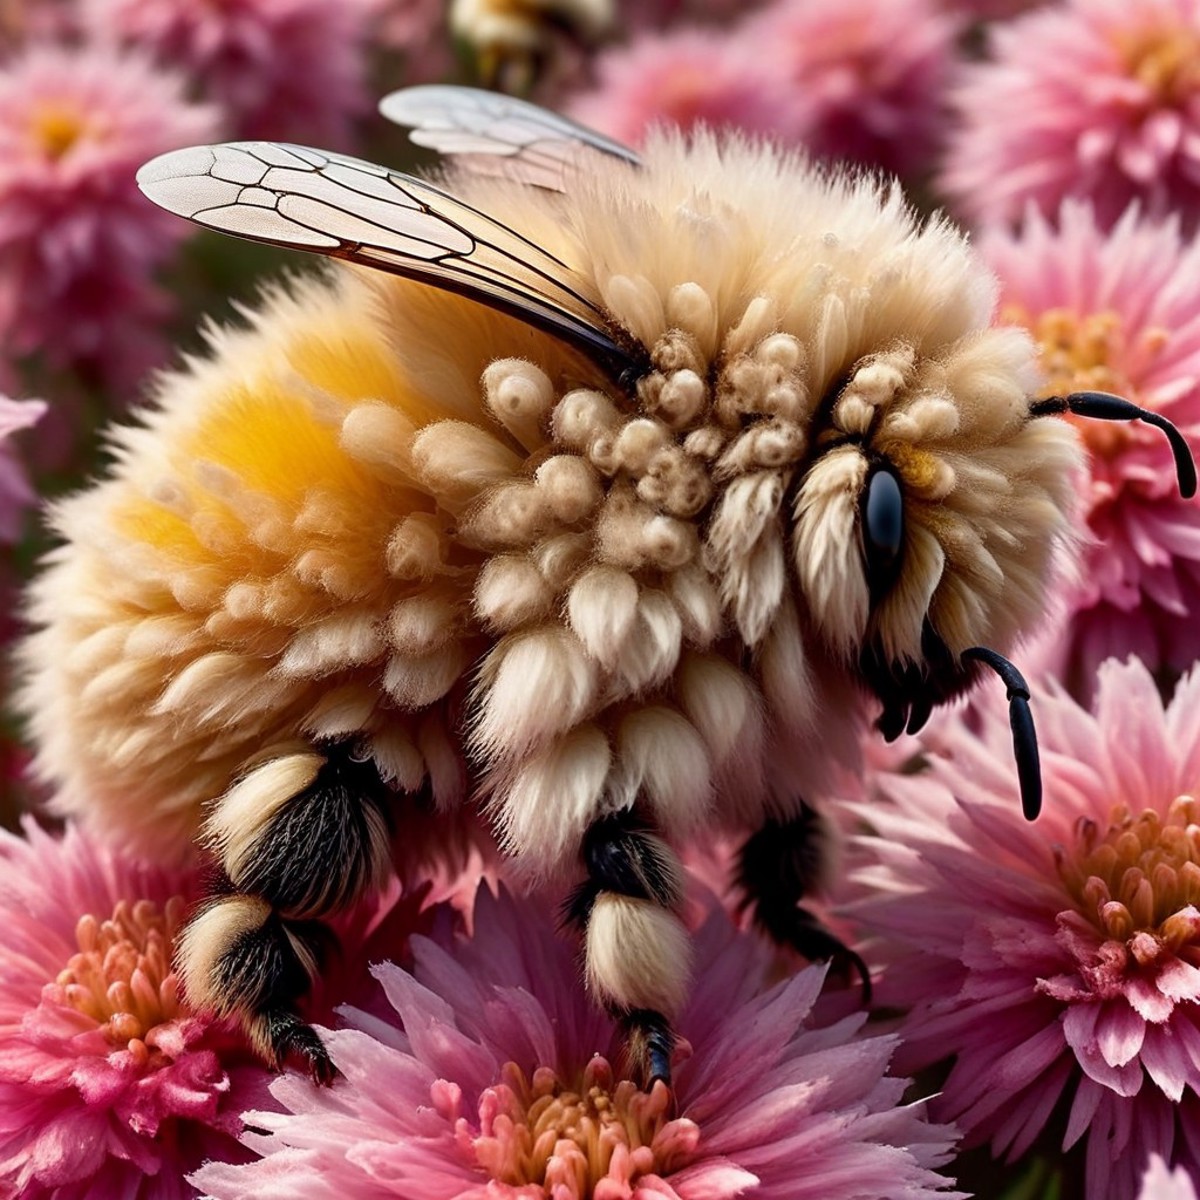 A fluffy bee with yellow and black stripes is seen sitting on pink flowers.